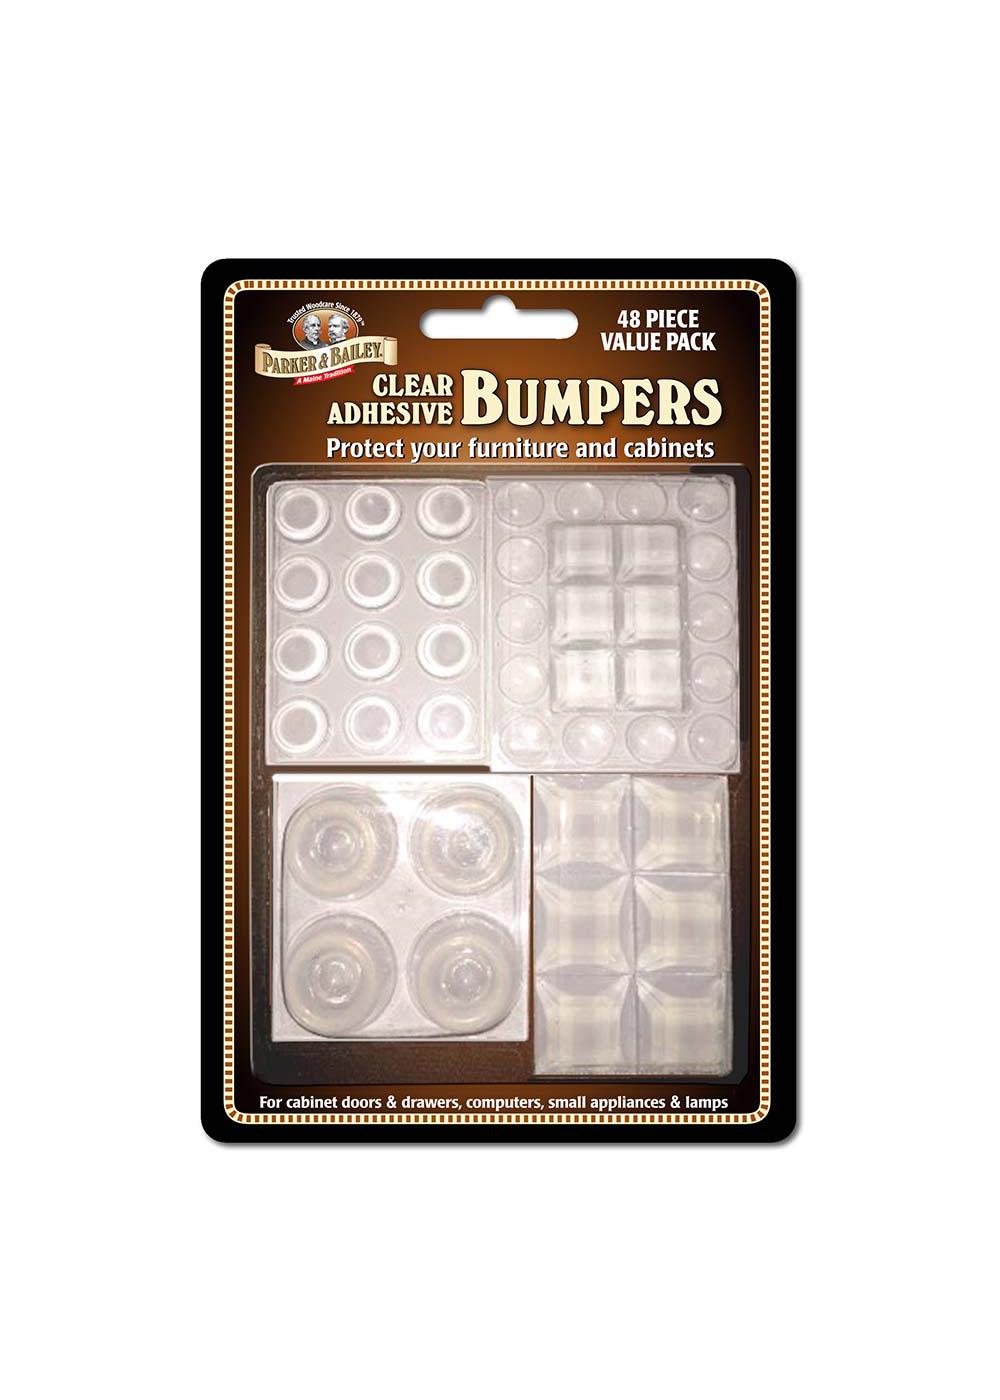 Parker & Bailey Clear Adhesive Furniture Bumpers; image 1 of 2